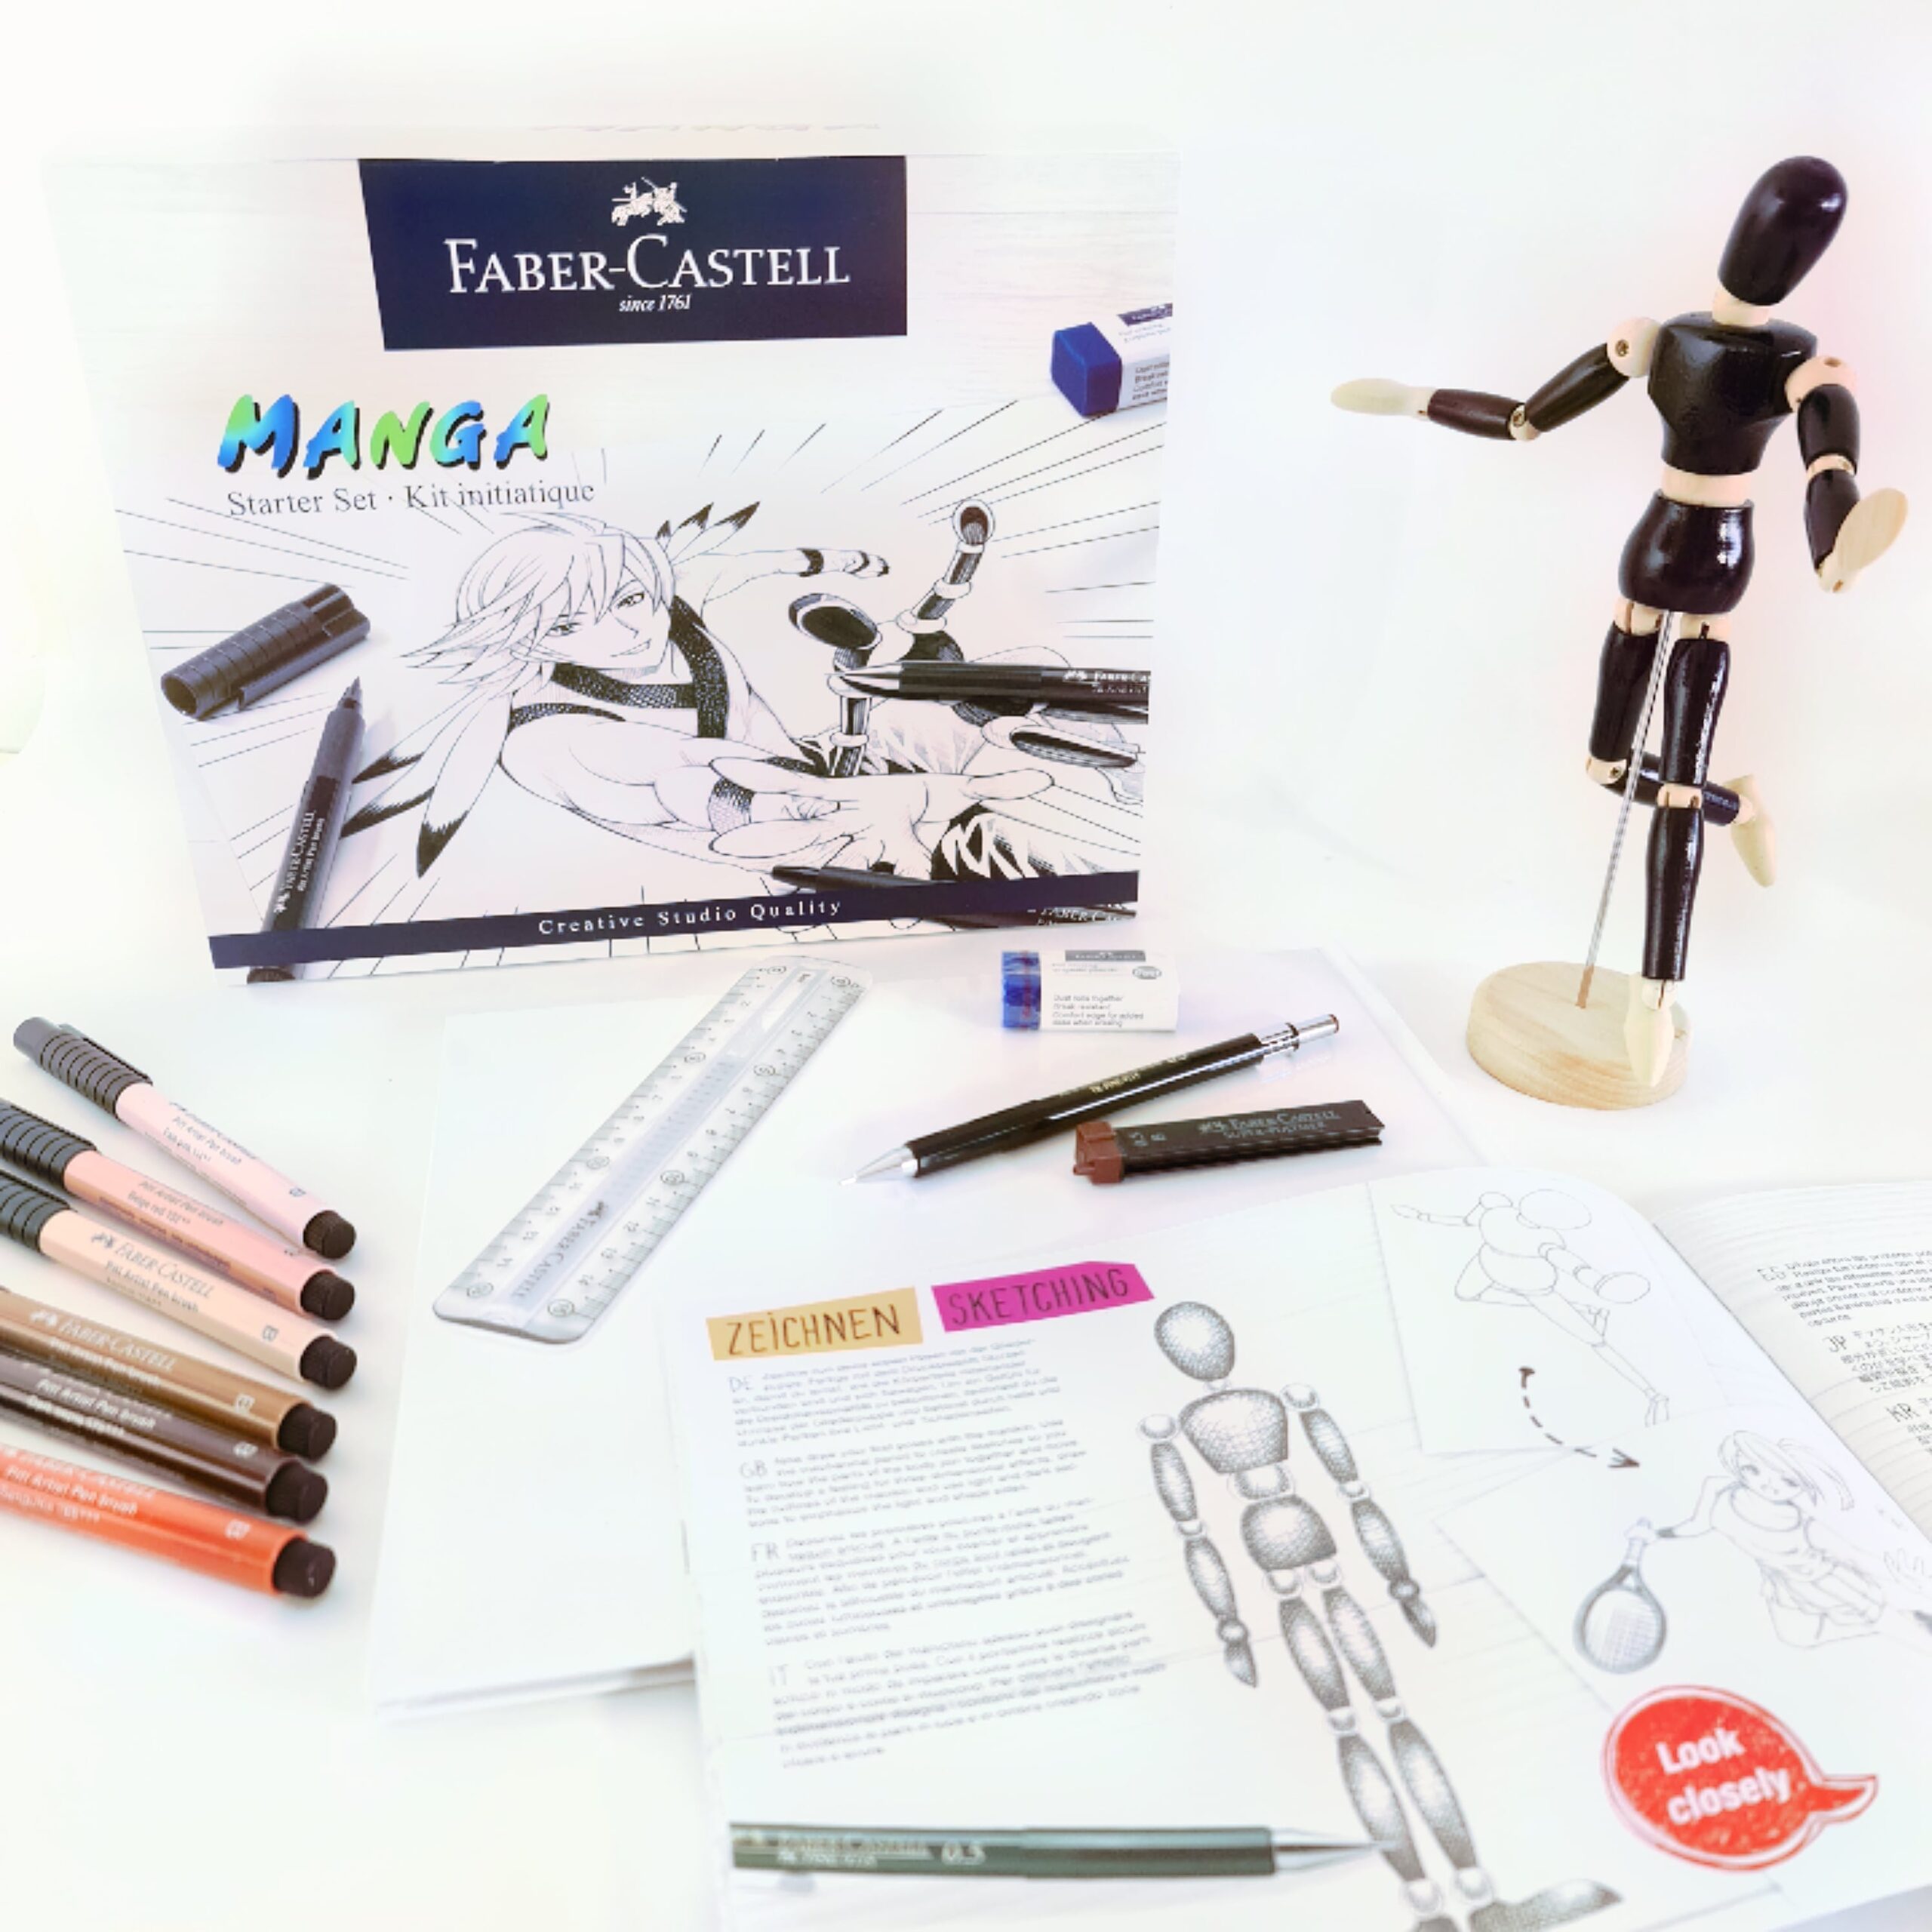 Faber Castell Manga Creative Studio - Getting Started:Complete